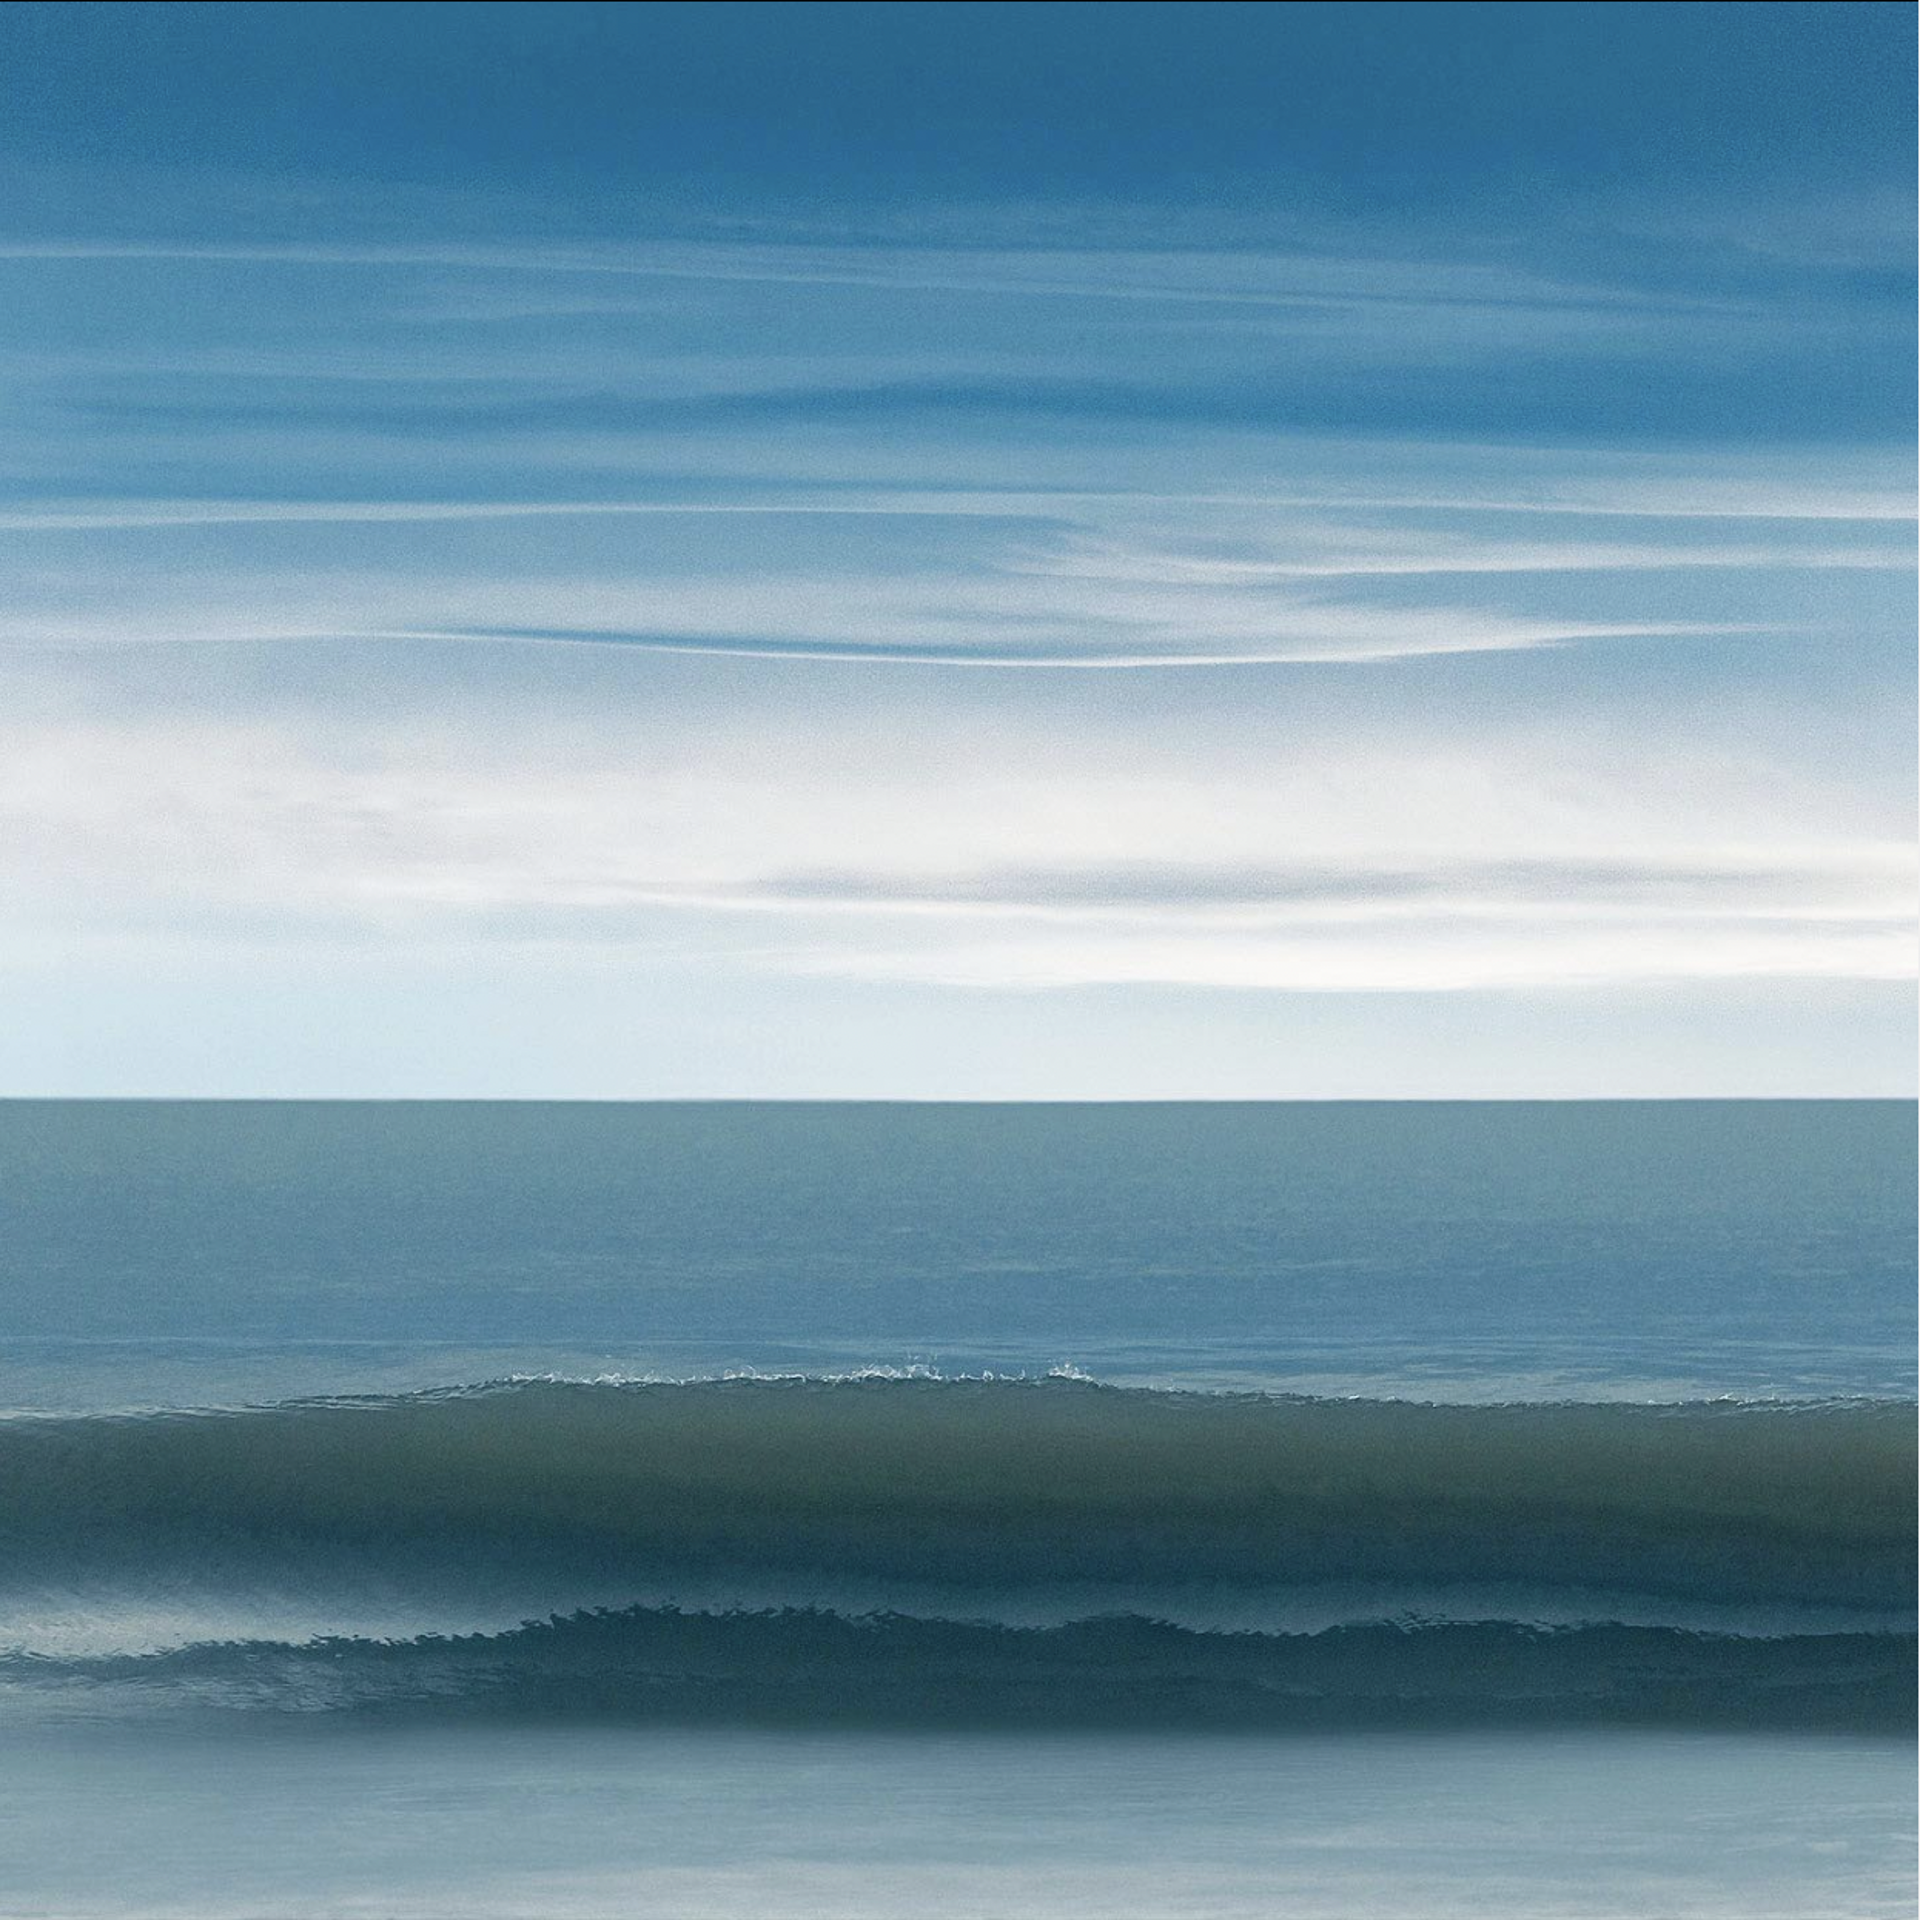 Sea Lines by Thomas Hager